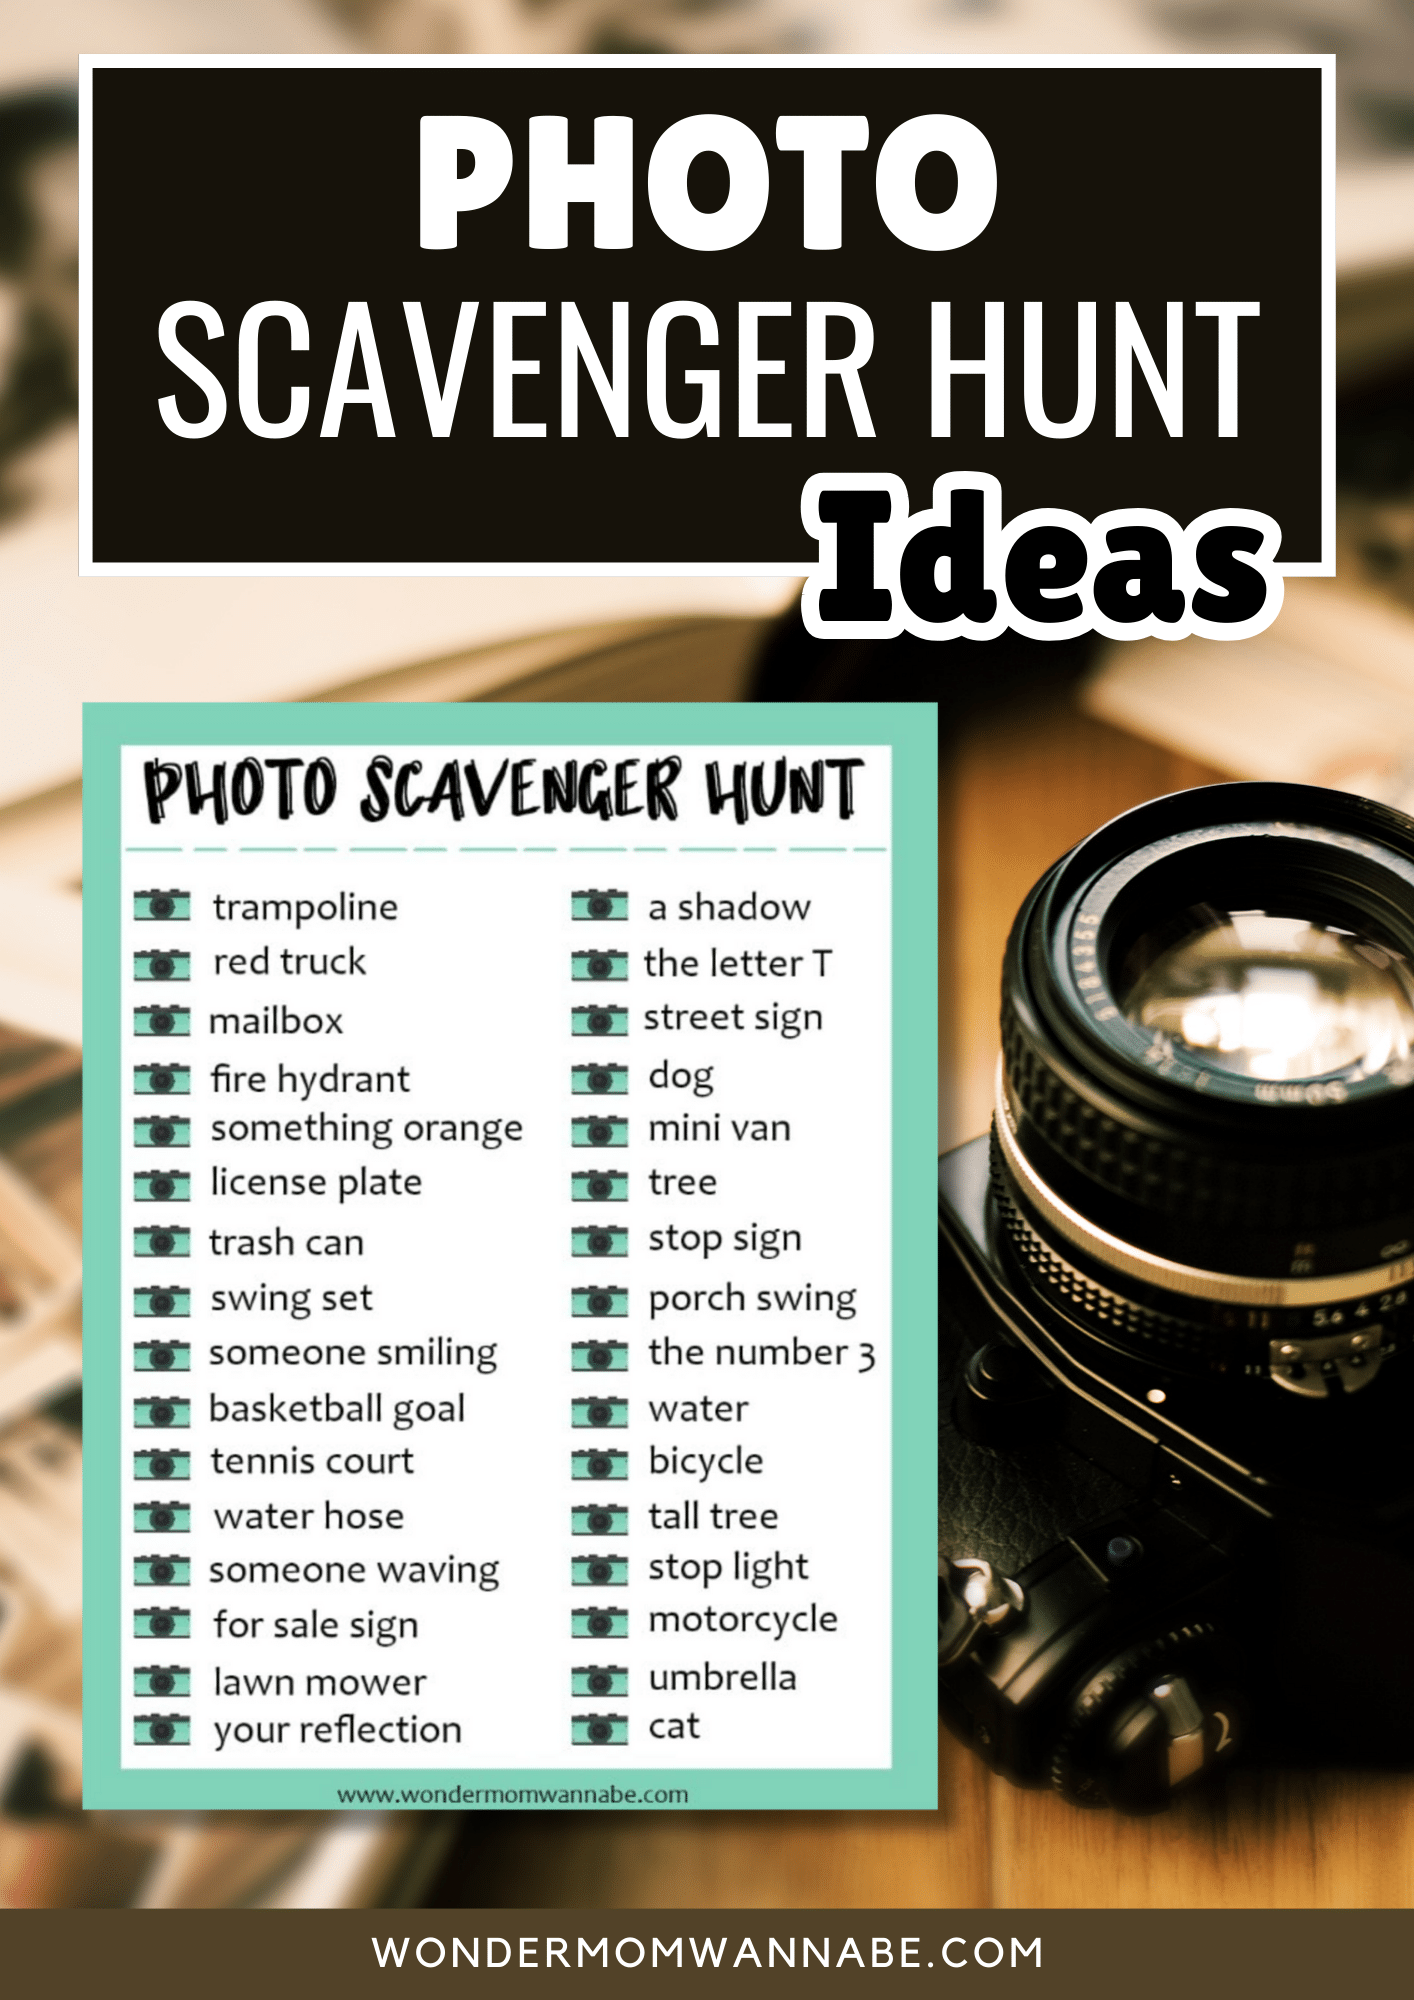 Photo Scavenger Hunt ideas are a fun way to engage in an exciting adventure while capturing memorable moments with your camera.